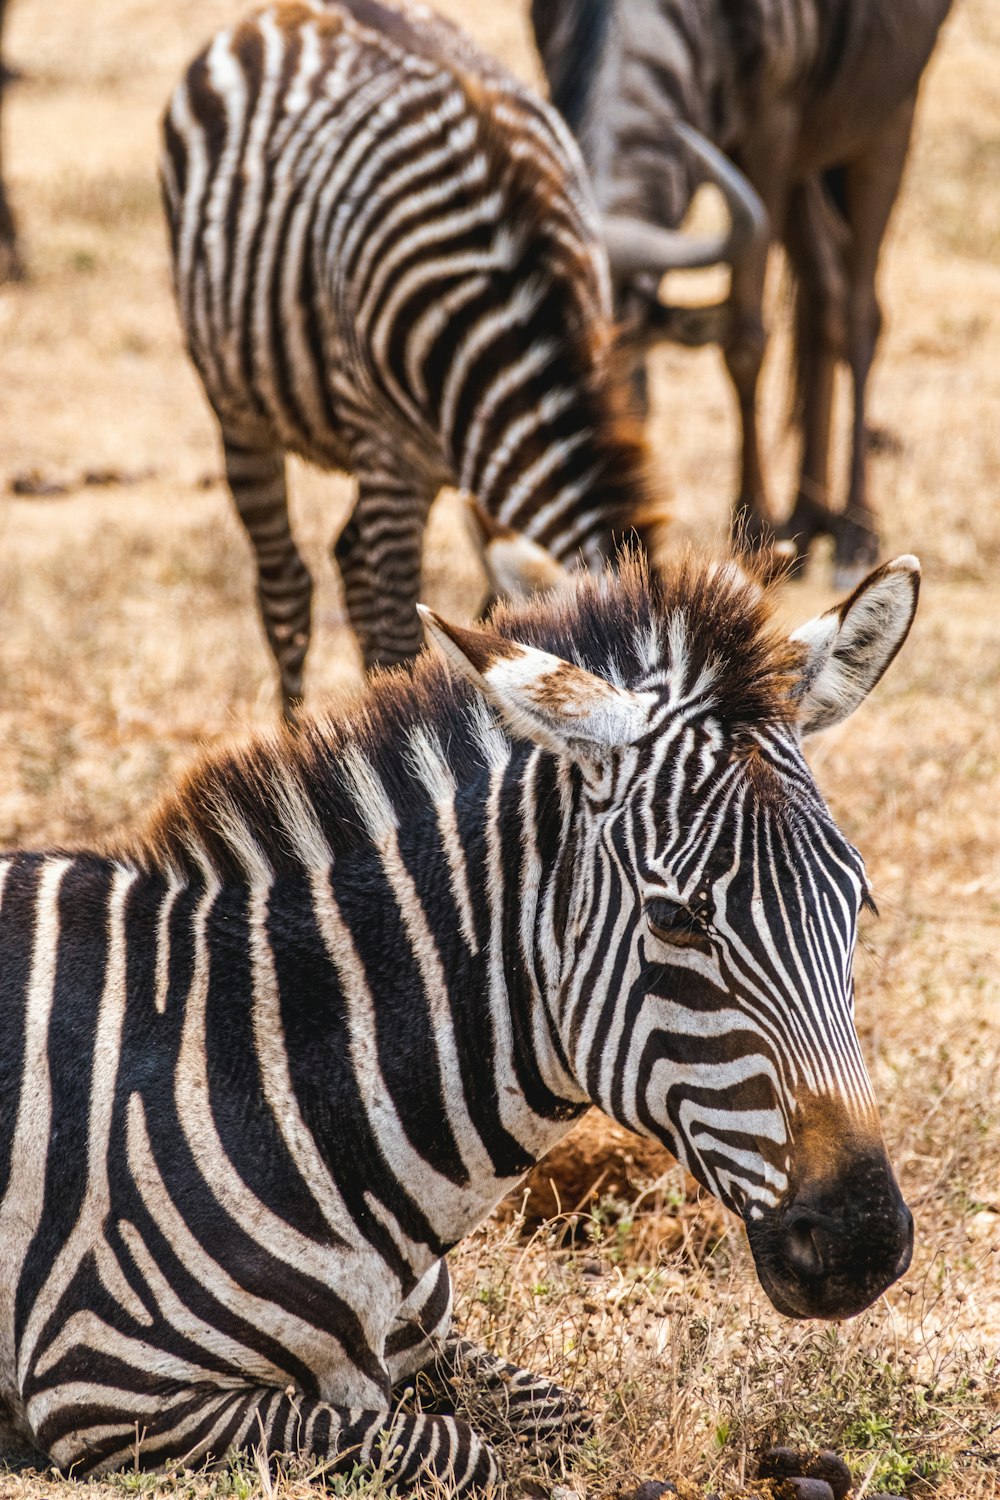 a zebra laying on the ground with other zebras in the background